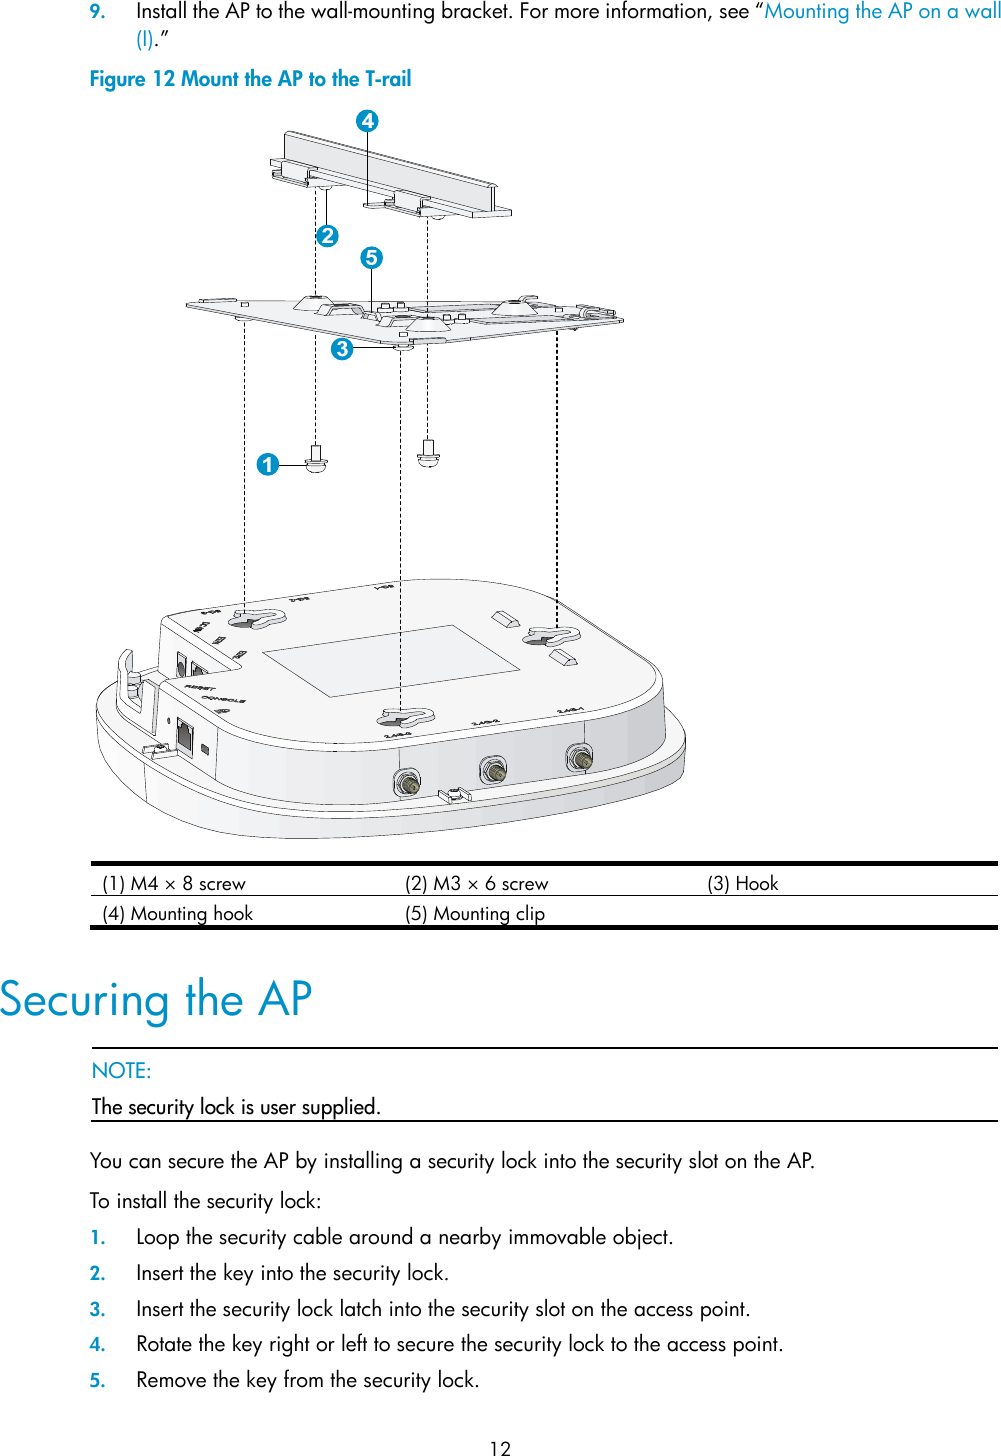  12 9. Install the AP to the wall-mounting bracket. For more information, see “Mounting the AP on a wall (I).” Figure 12 Mount the AP to the T-rail  (1) M4 × 8 screw  (2) M3 × 6 screw  (3) Hook (4) Mounting hook (5) Mounting clip   Securing the AP   NOTE: The security lock is user supplied.  You can secure the AP by installing a security lock into the security slot on the AP. To install the security lock: 1. Loop the security cable around a nearby immovable object. 2. Insert the key into the security lock. 3. Insert the security lock latch into the security slot on the access point. 4. Rotate the key right or left to secure the security lock to the access point. 5. Remove the key from the security lock. 